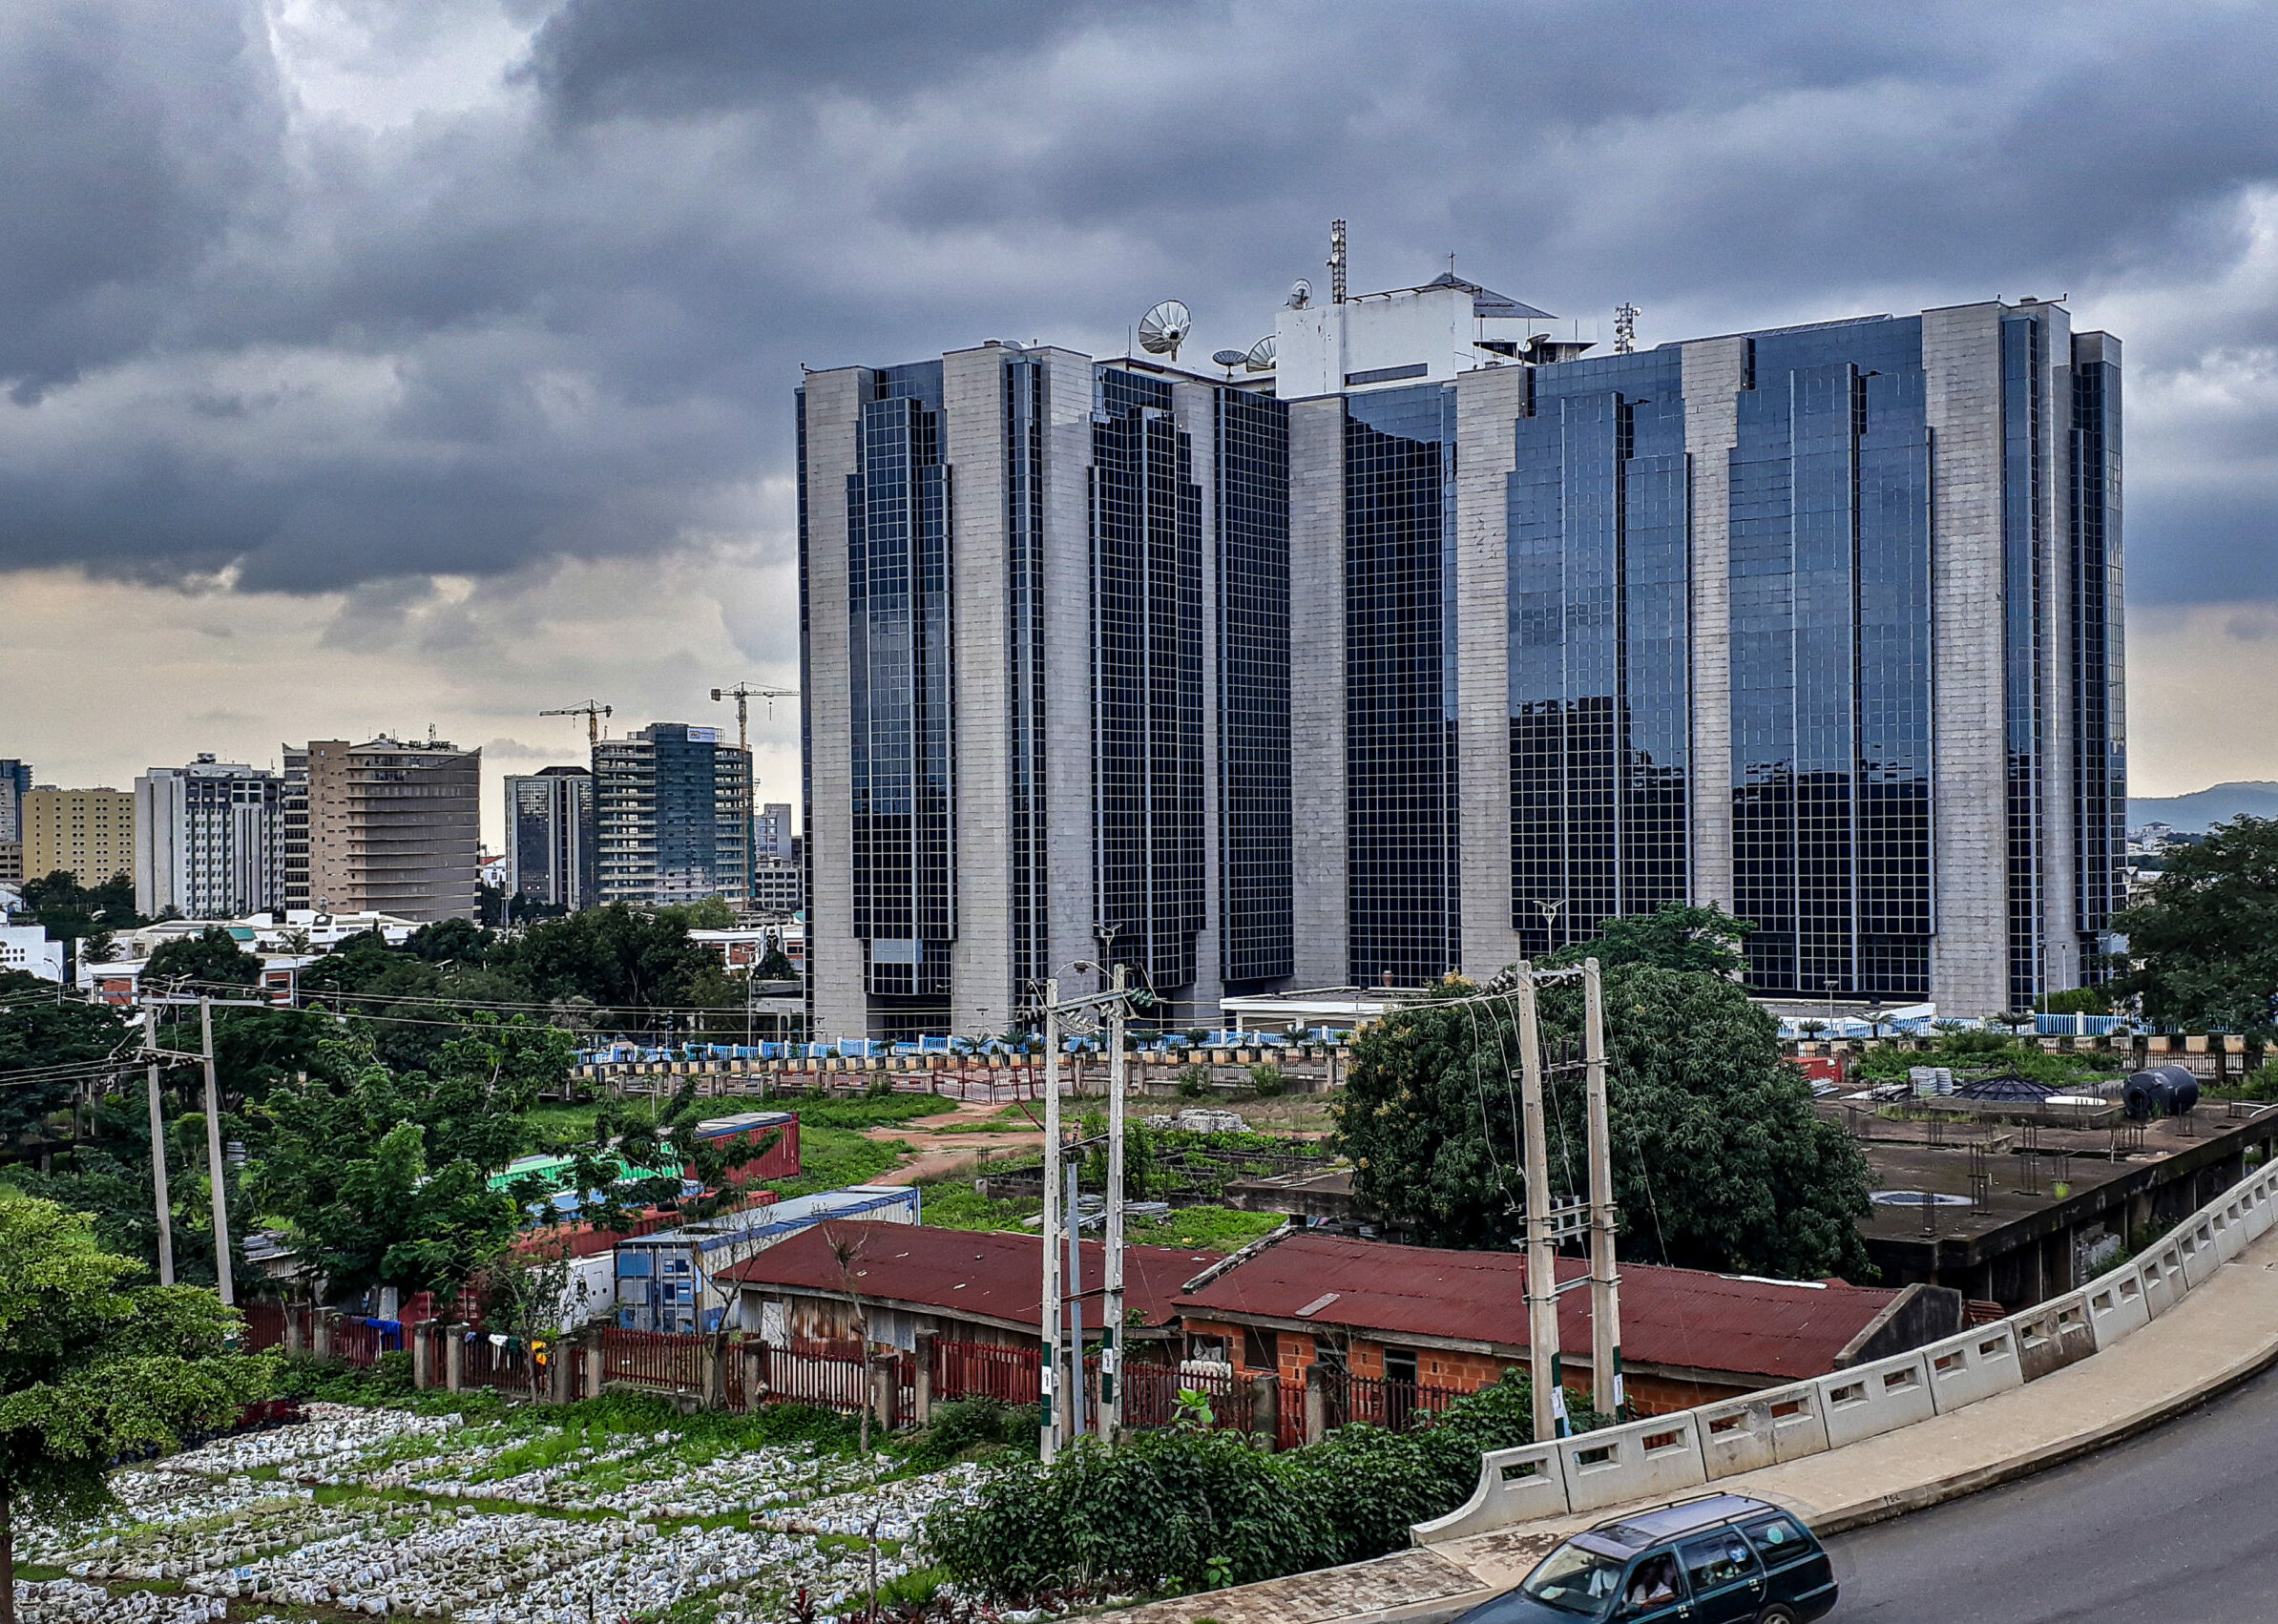 Nigeria’s Exchange Rate Volatility and Foreign Direct Investment : Is This A Conundrum With a Solution in Sight? 